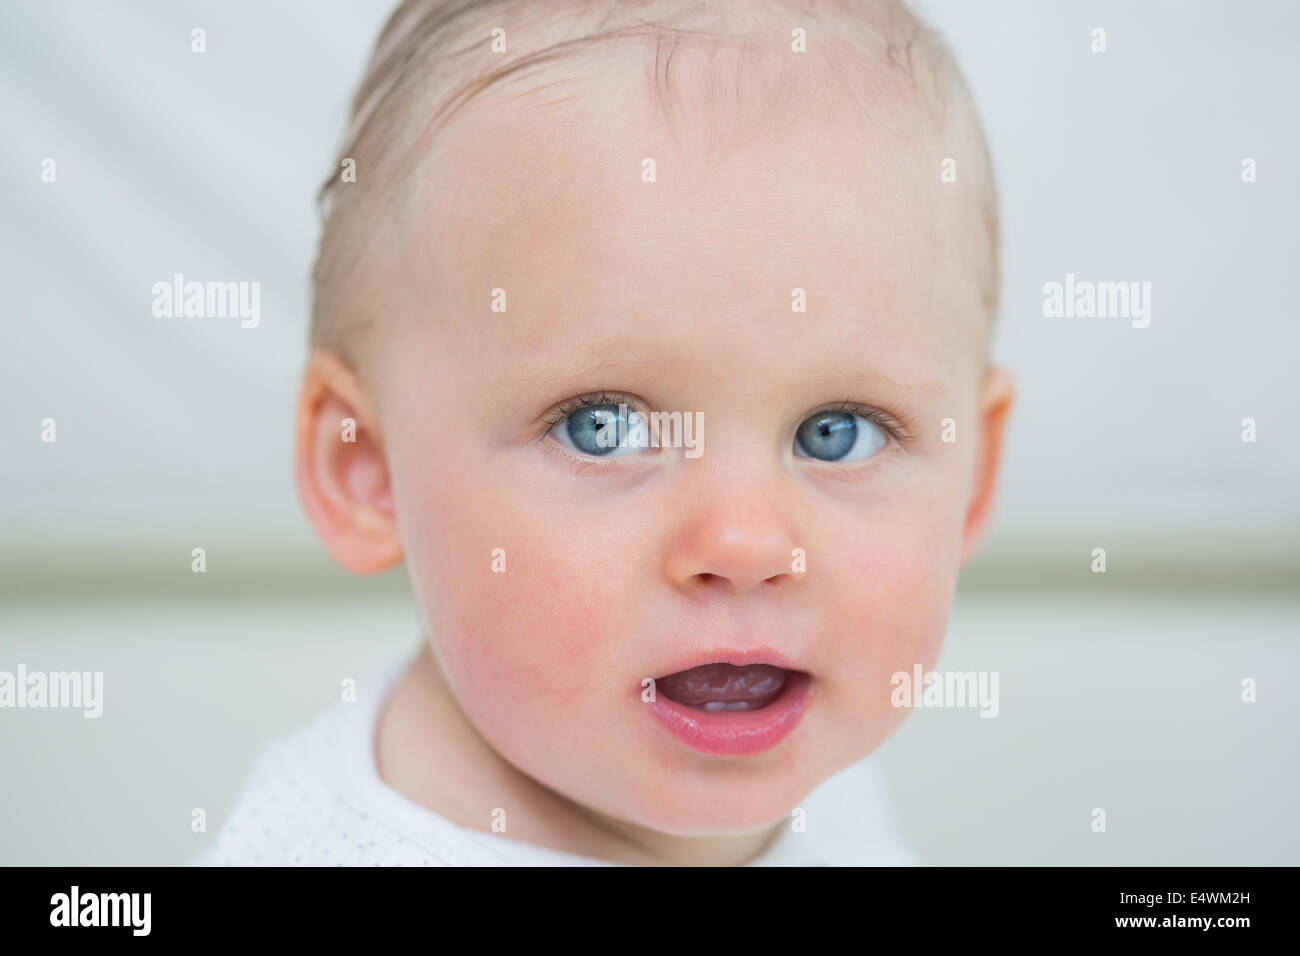 Close up of a baby having blue eyes Stock Photo - Alamy